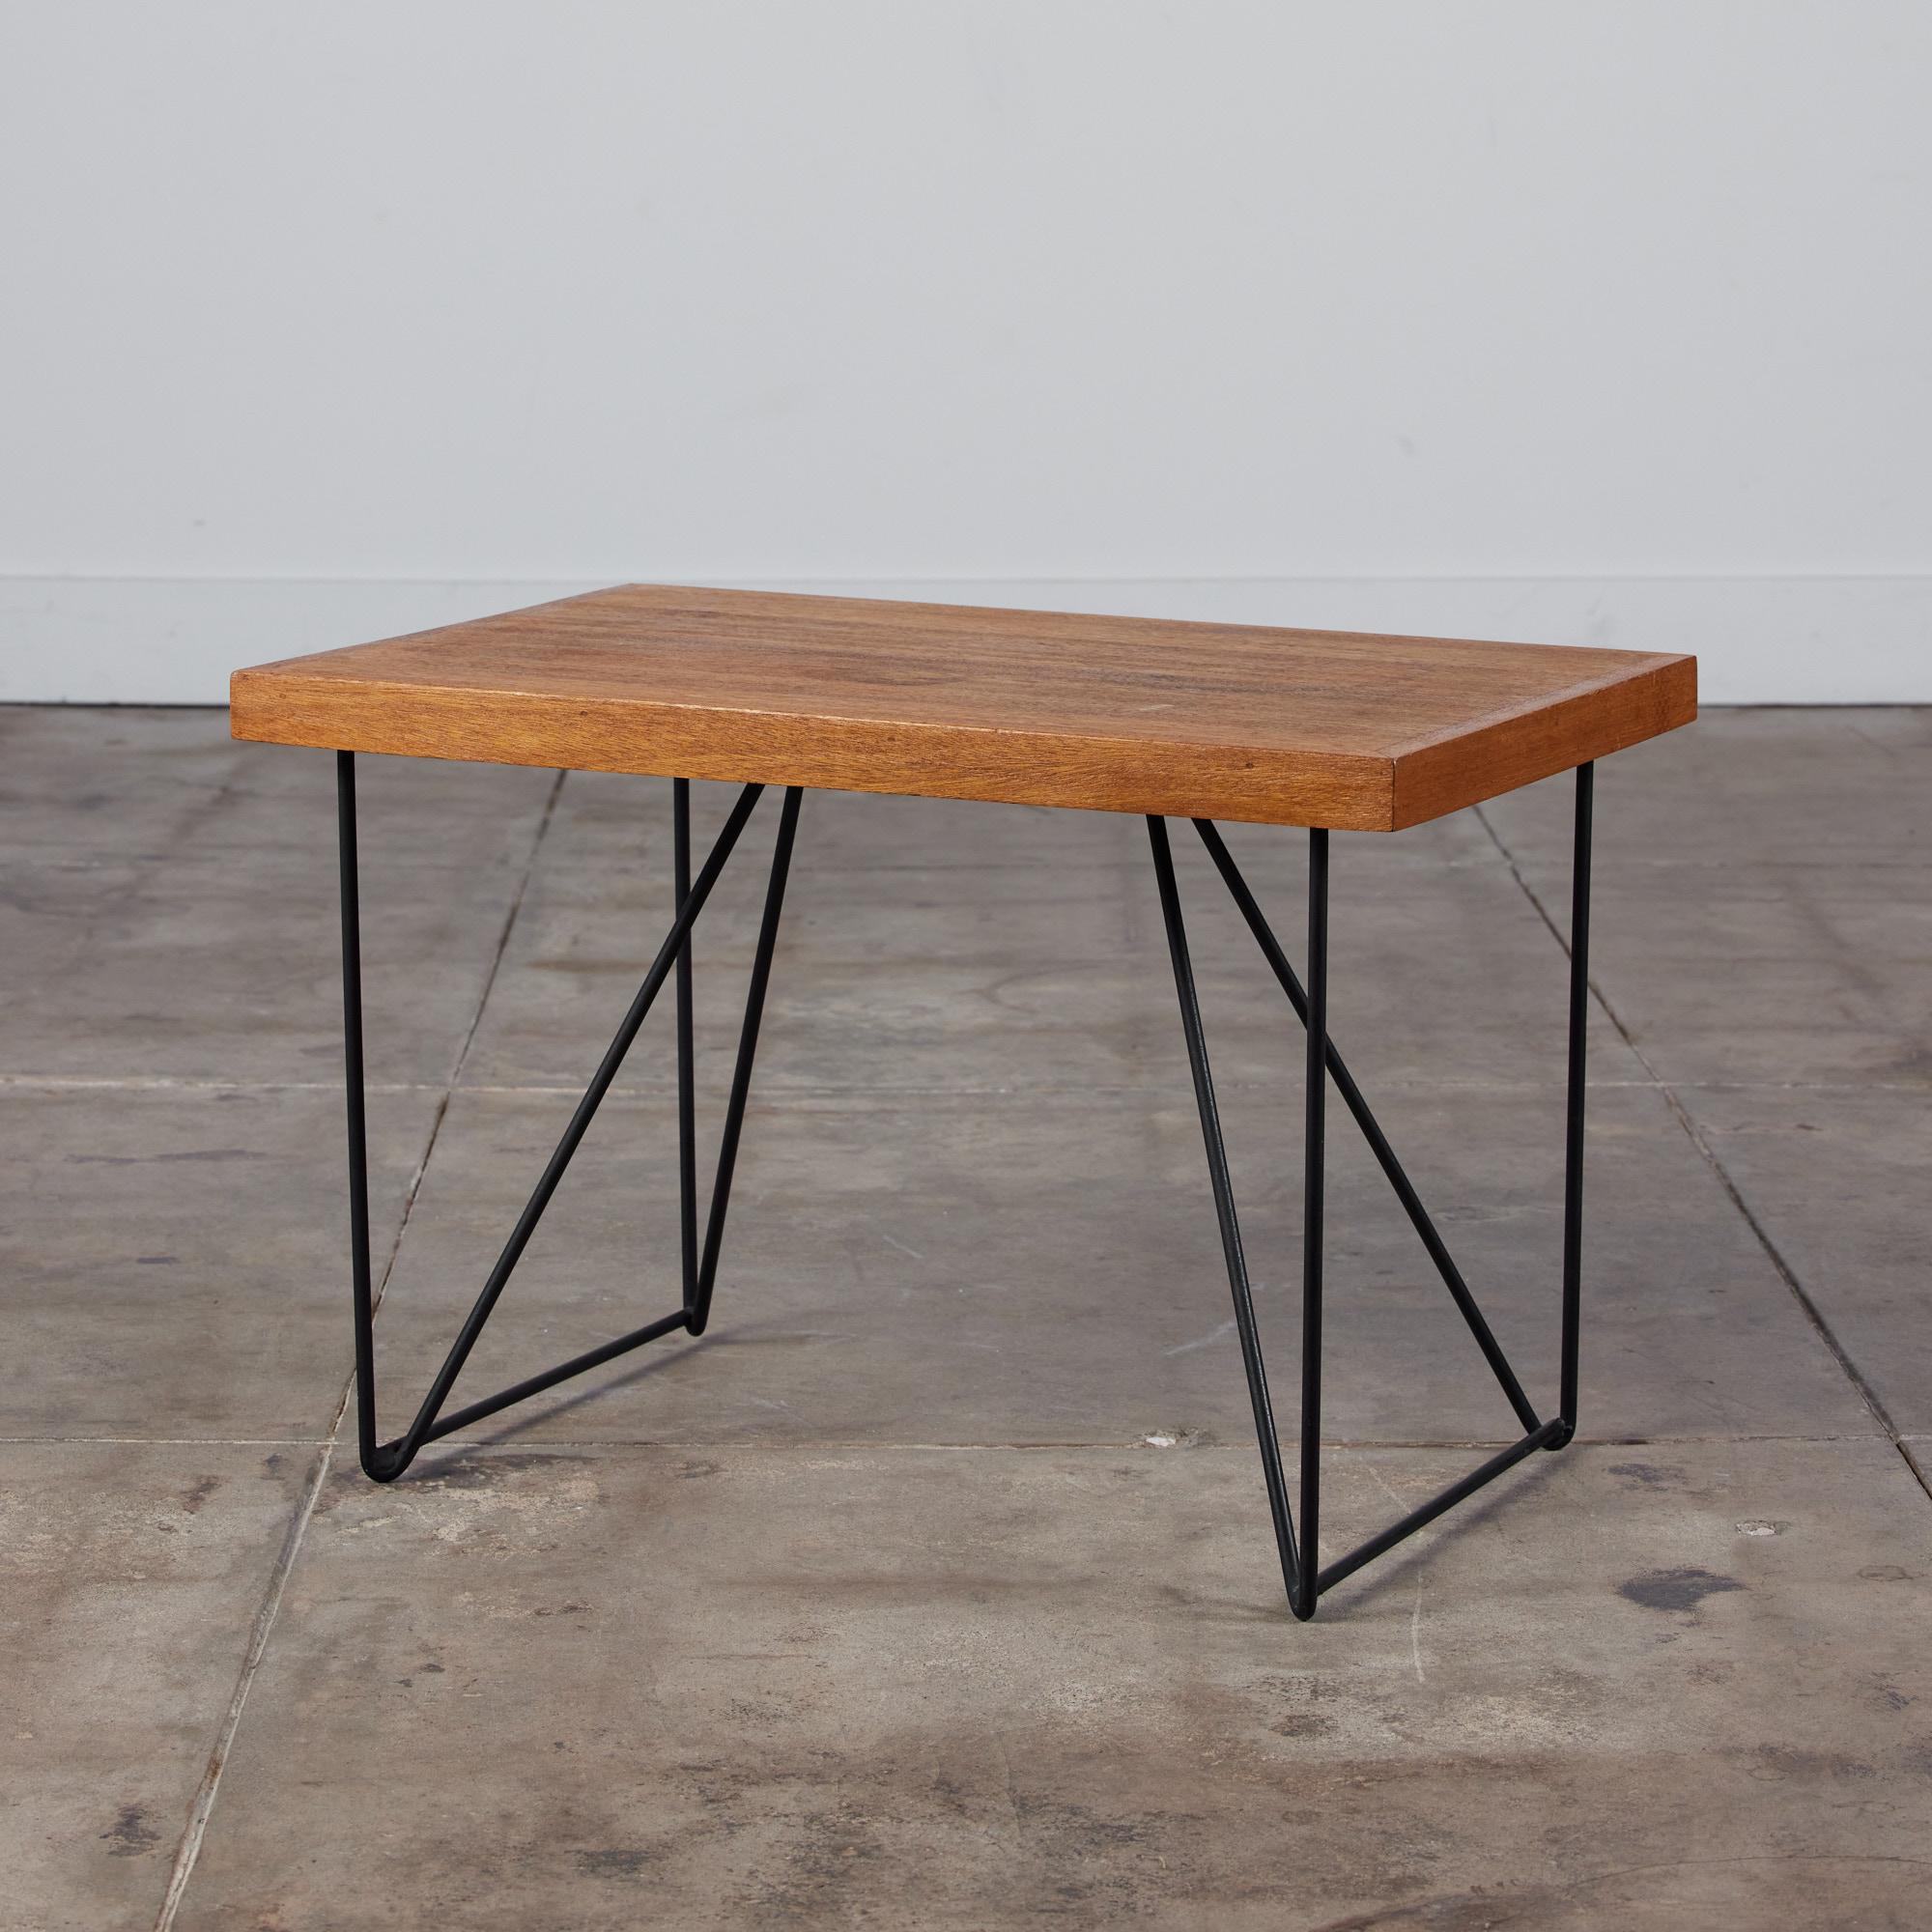 A design by Luther Conover for Pacifica c.1950s, USA. This table features a rectangular mahogany table top set atop iron hairpin legs. A simplistic design that can easily be used as both a side table or coffee table.

Dimensions: 28?